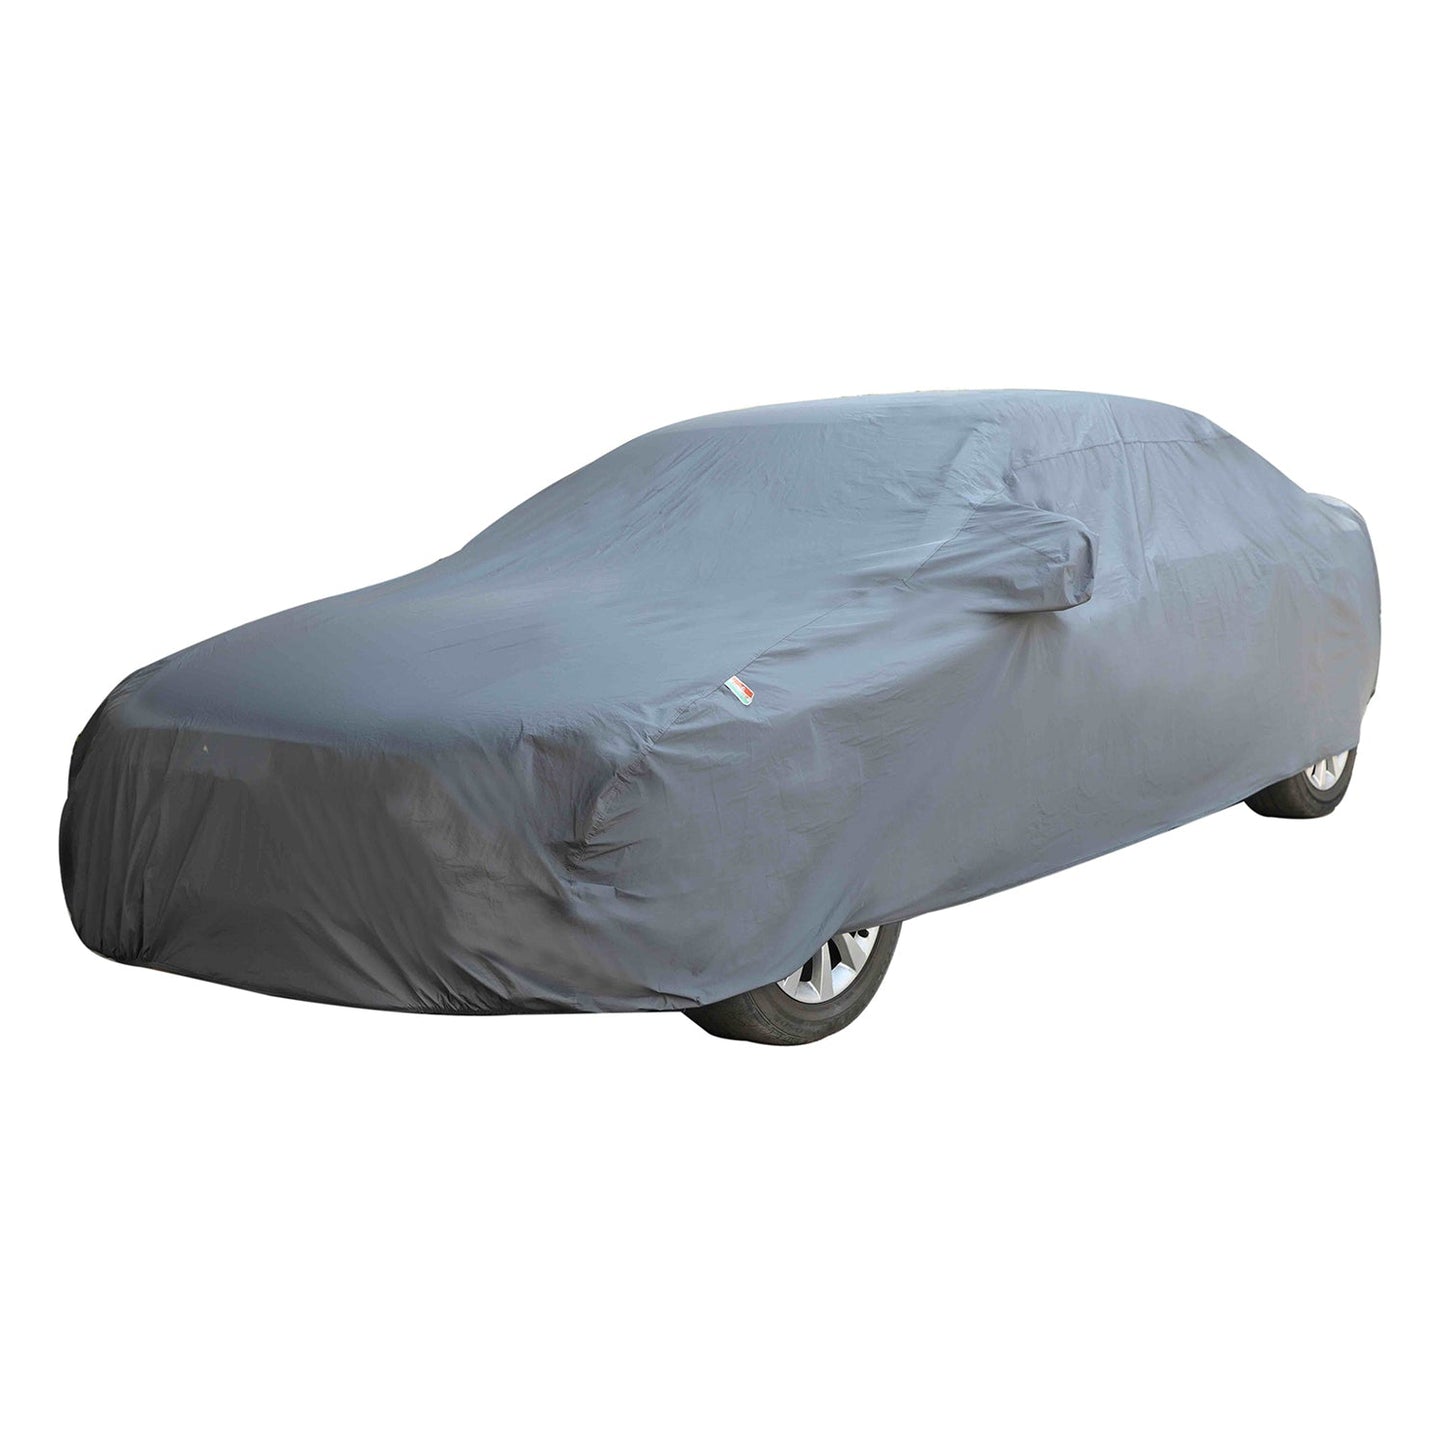 Oshotto Dark Grey 100% Anti Reflective, dustproof and Water Proof Car Body Cover with Mirror Pockets For MG Hector Plus